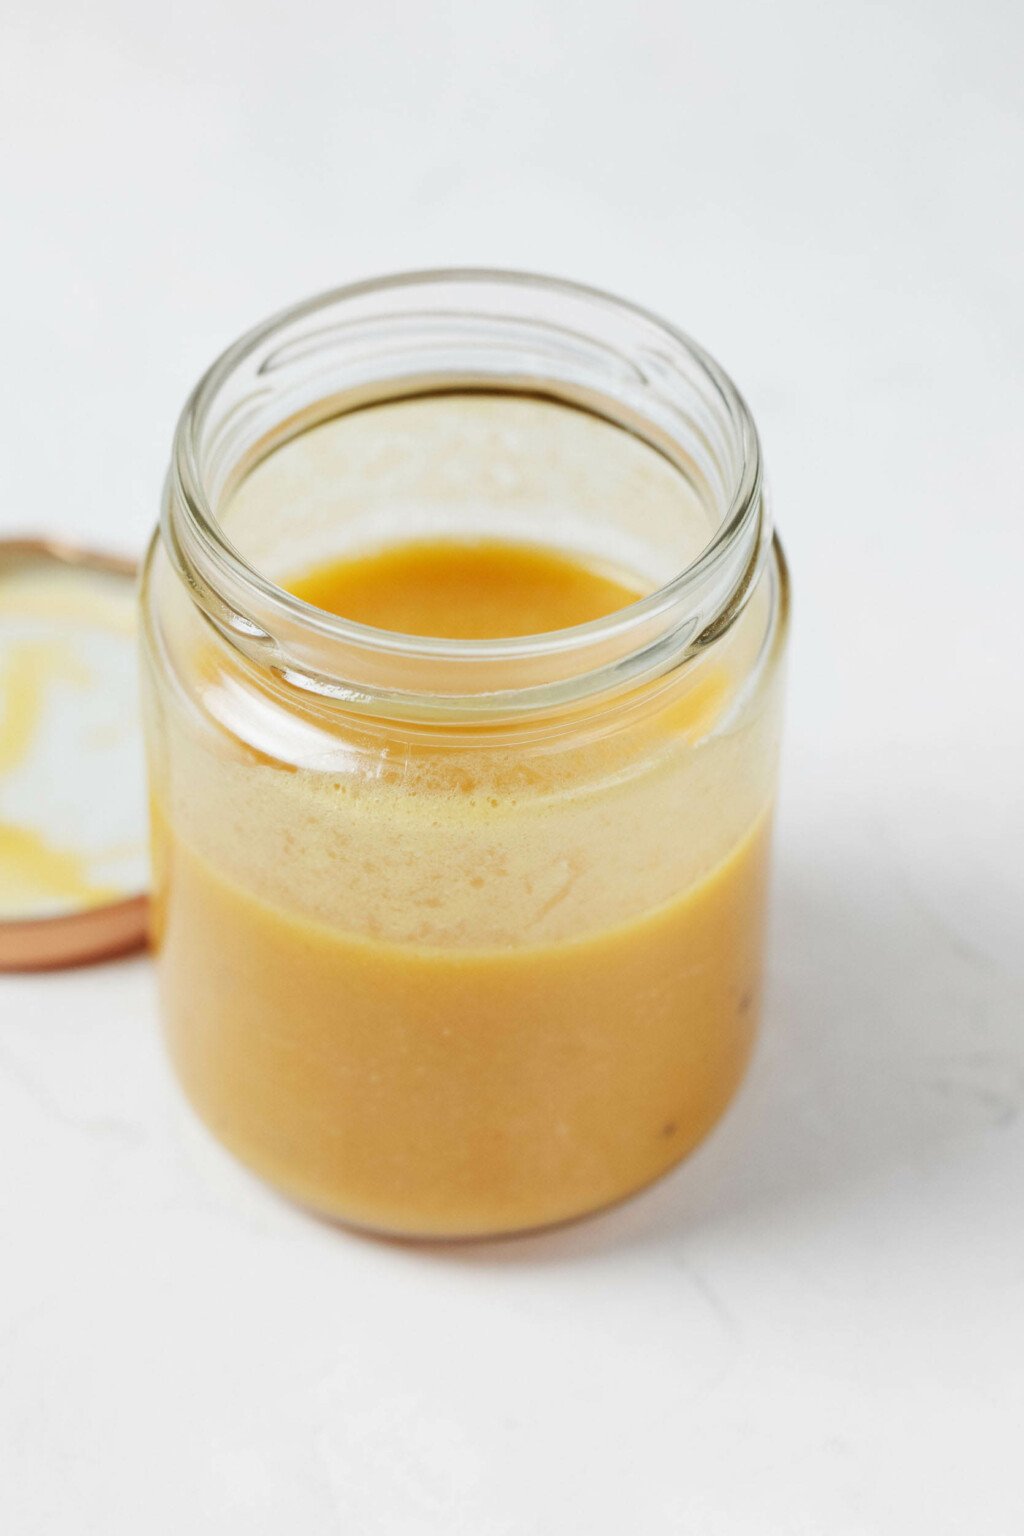 A glass mason jar rests on a white surface. It is filled with a creamy, pale golden vinaigrette.